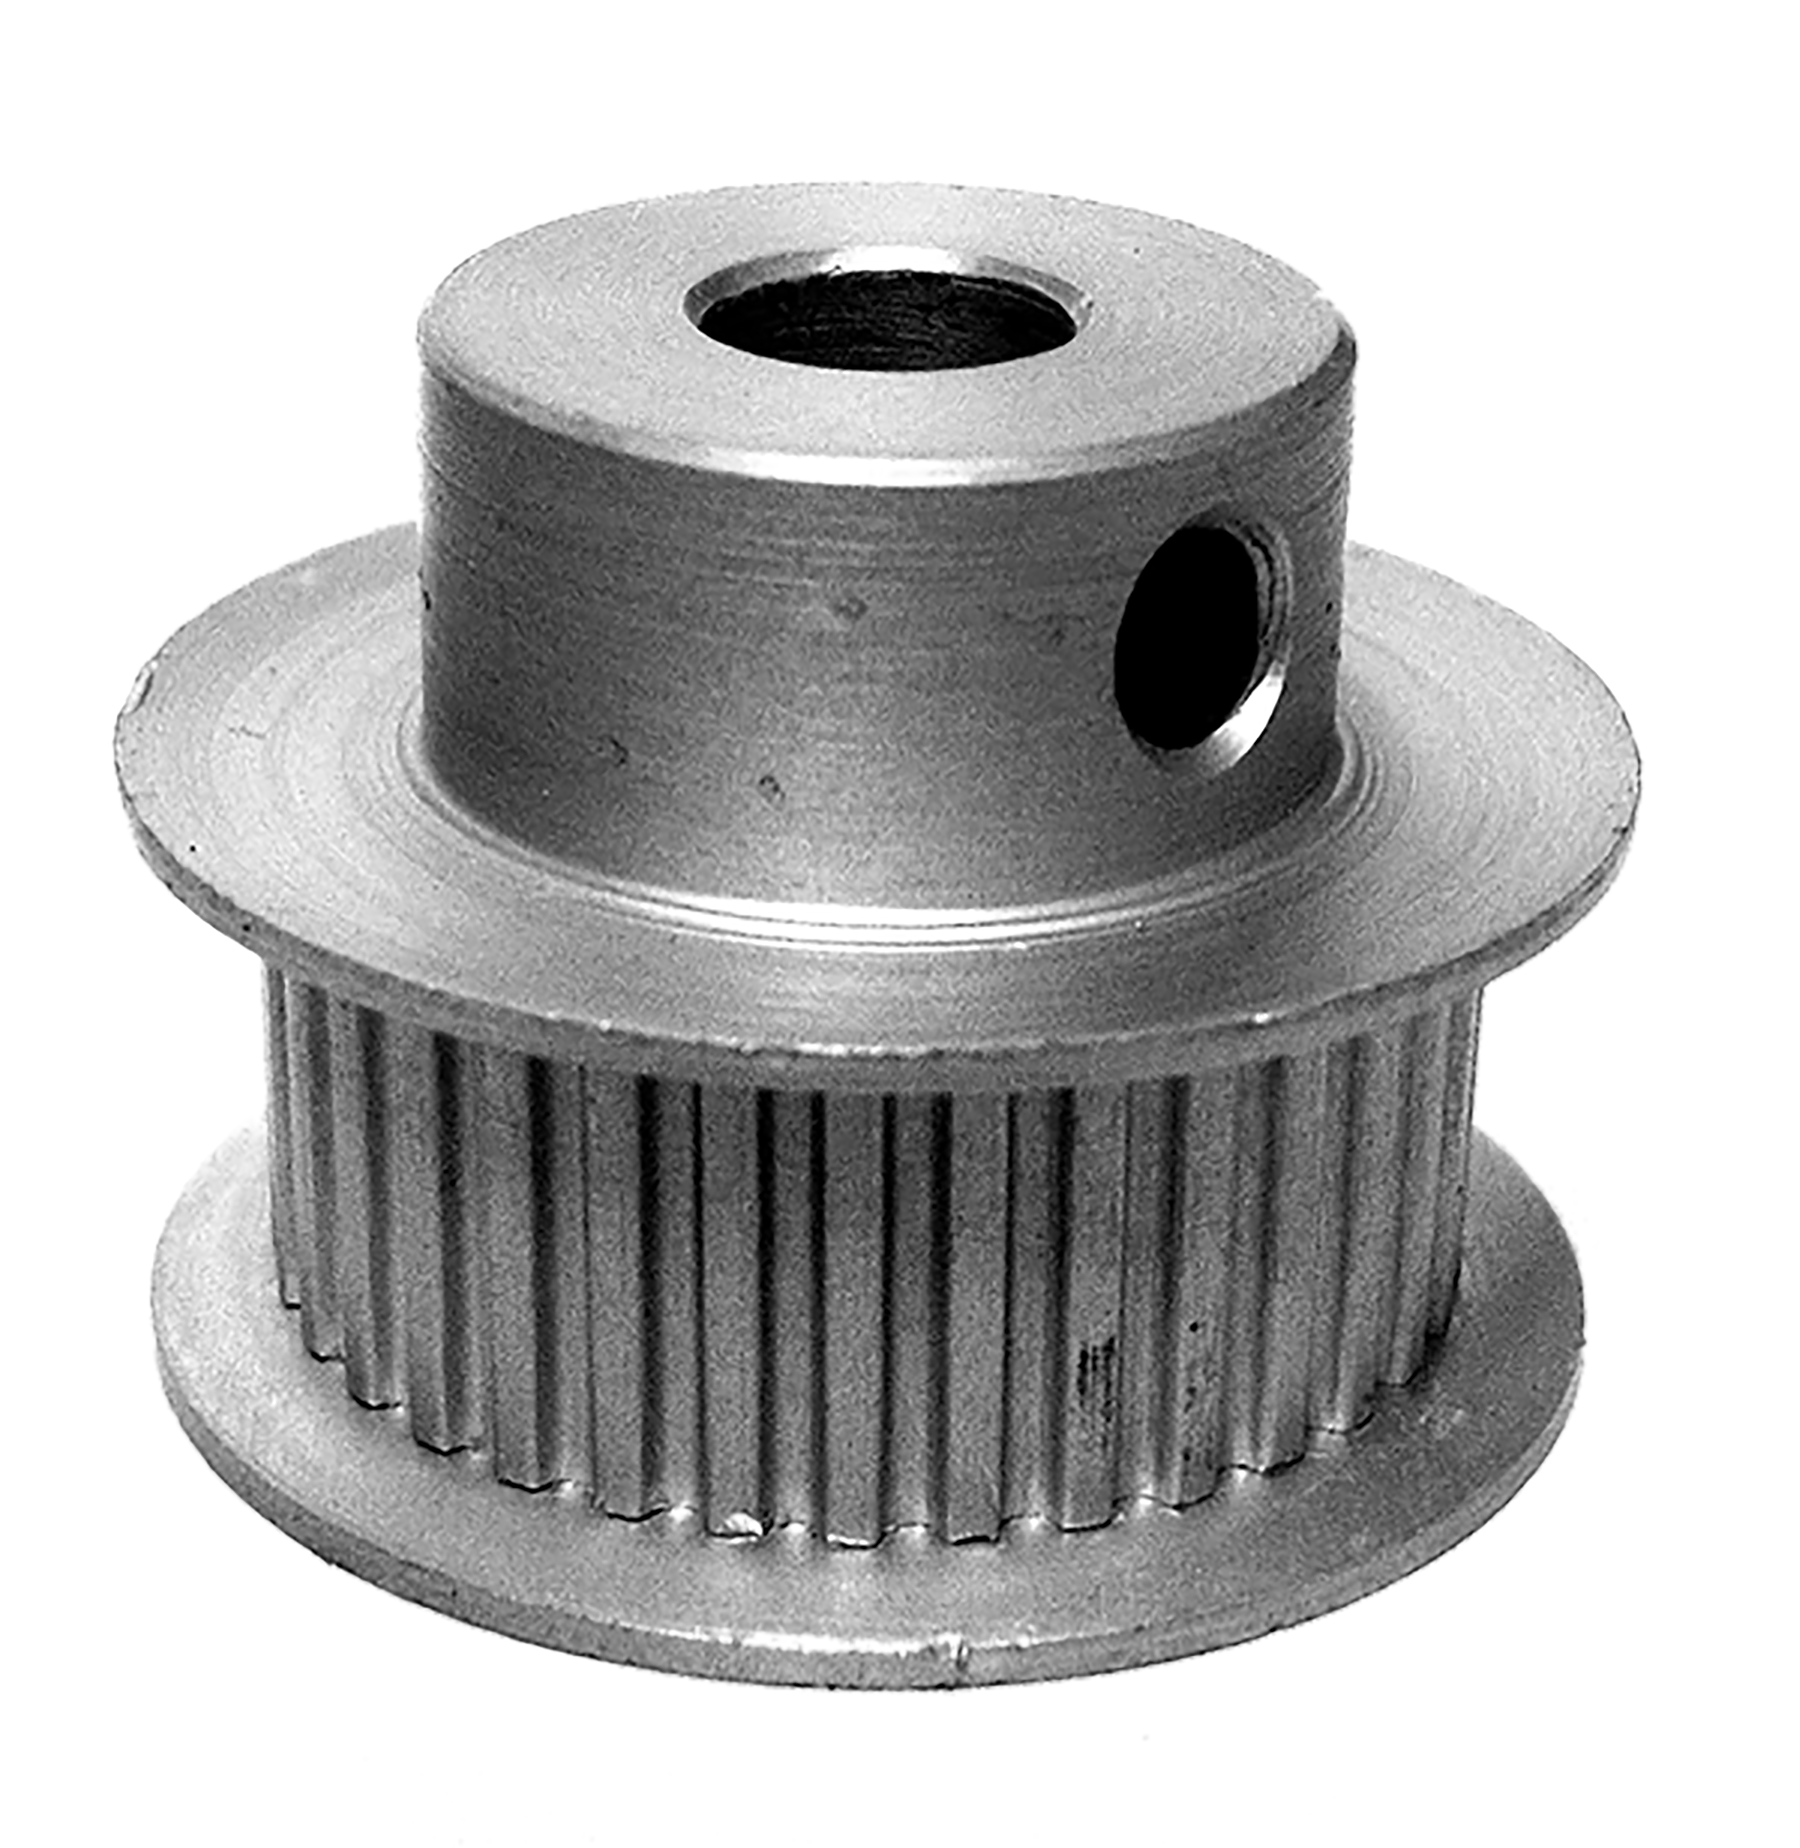 18LT312-6FA2 - Aluminum Imperial Pitch Pulleys